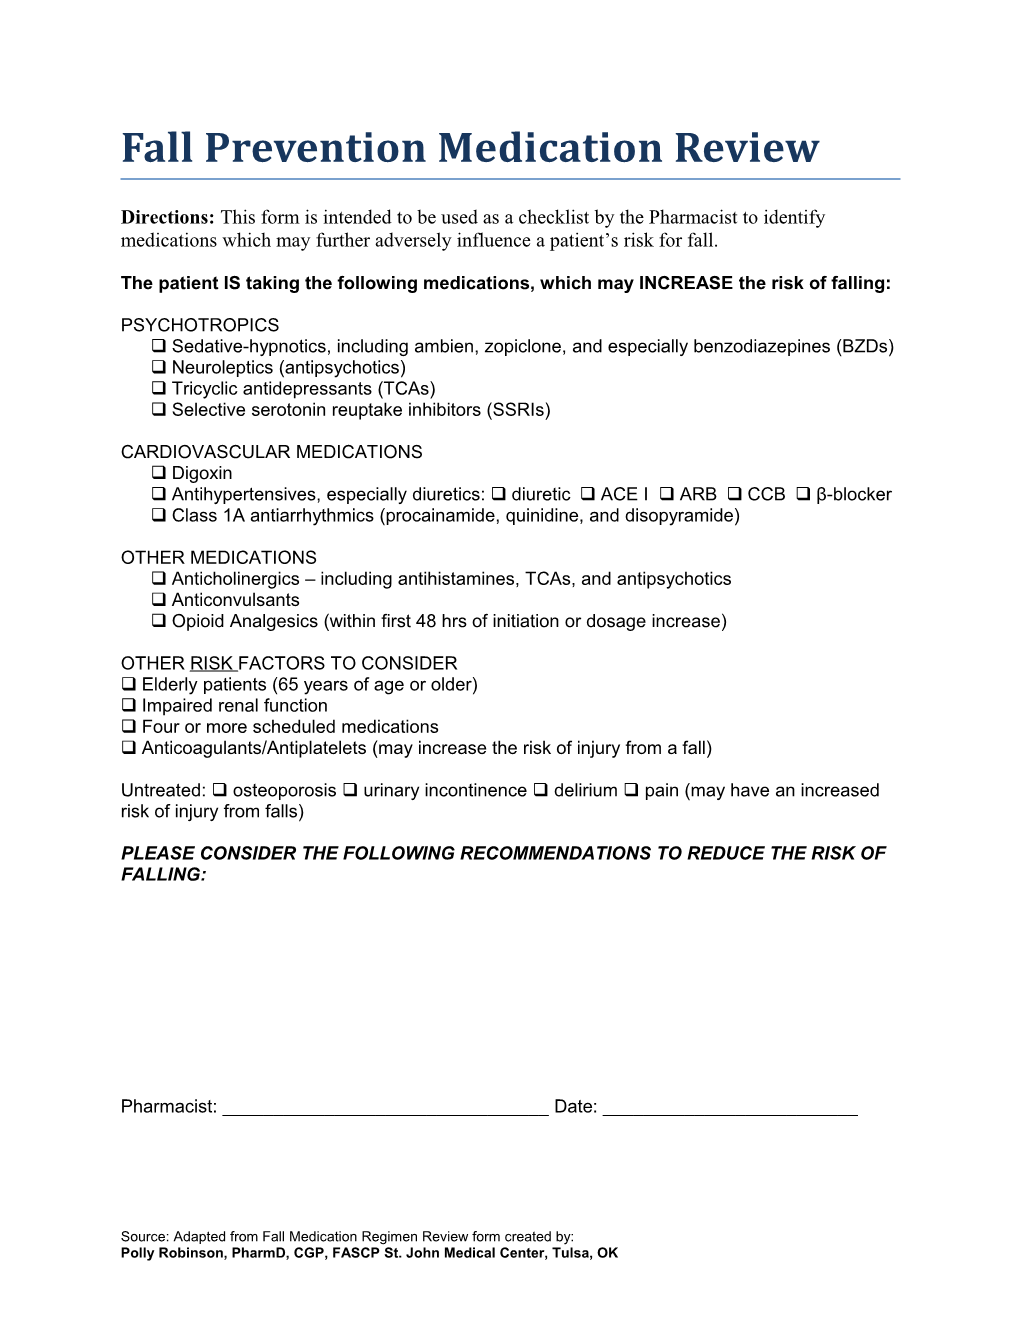 Fall Prevention Medication Review